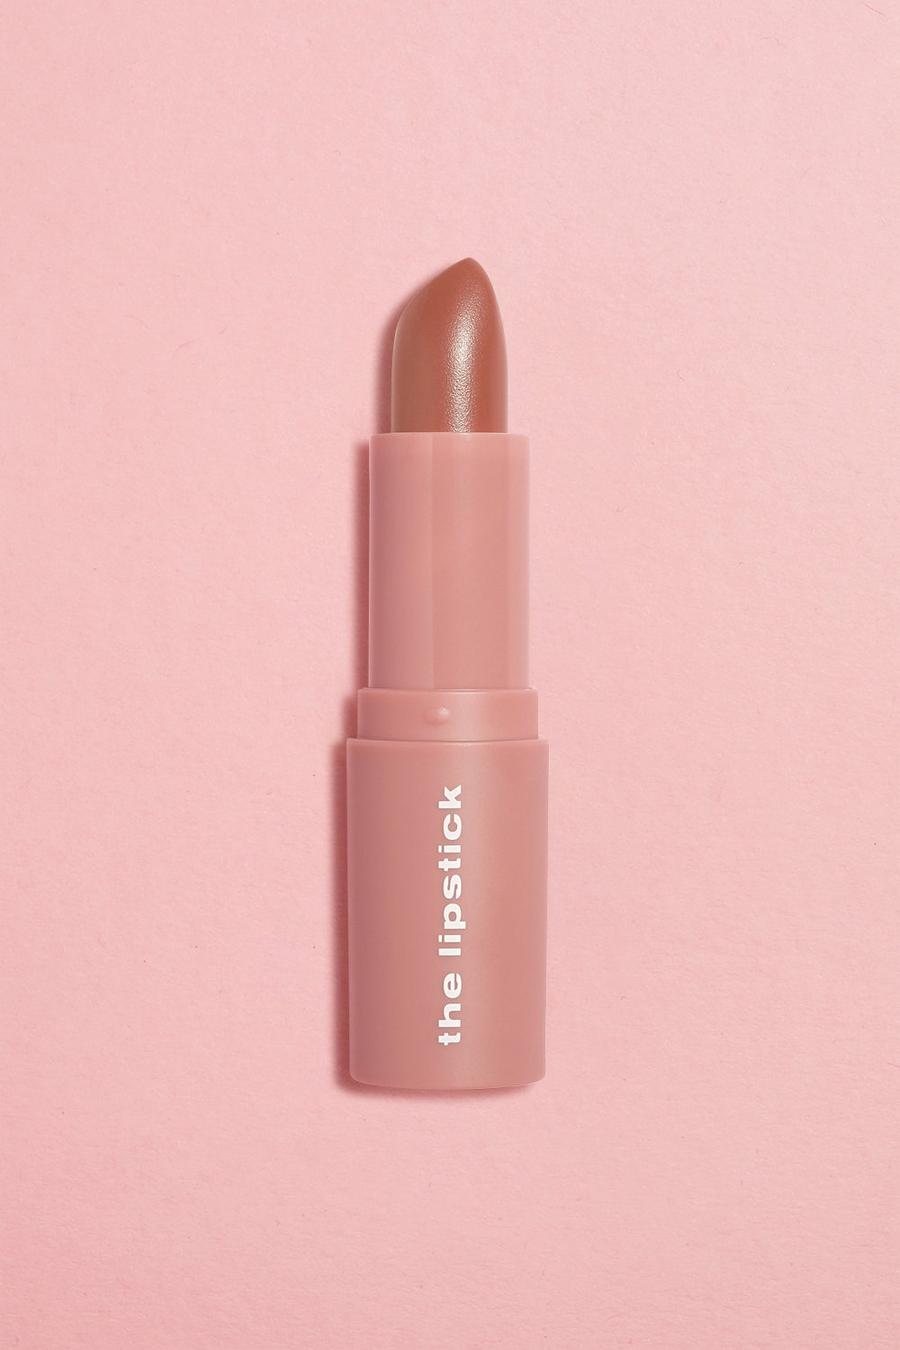 Boohoo Beauty Lippenstift - Pale Nude image number 1